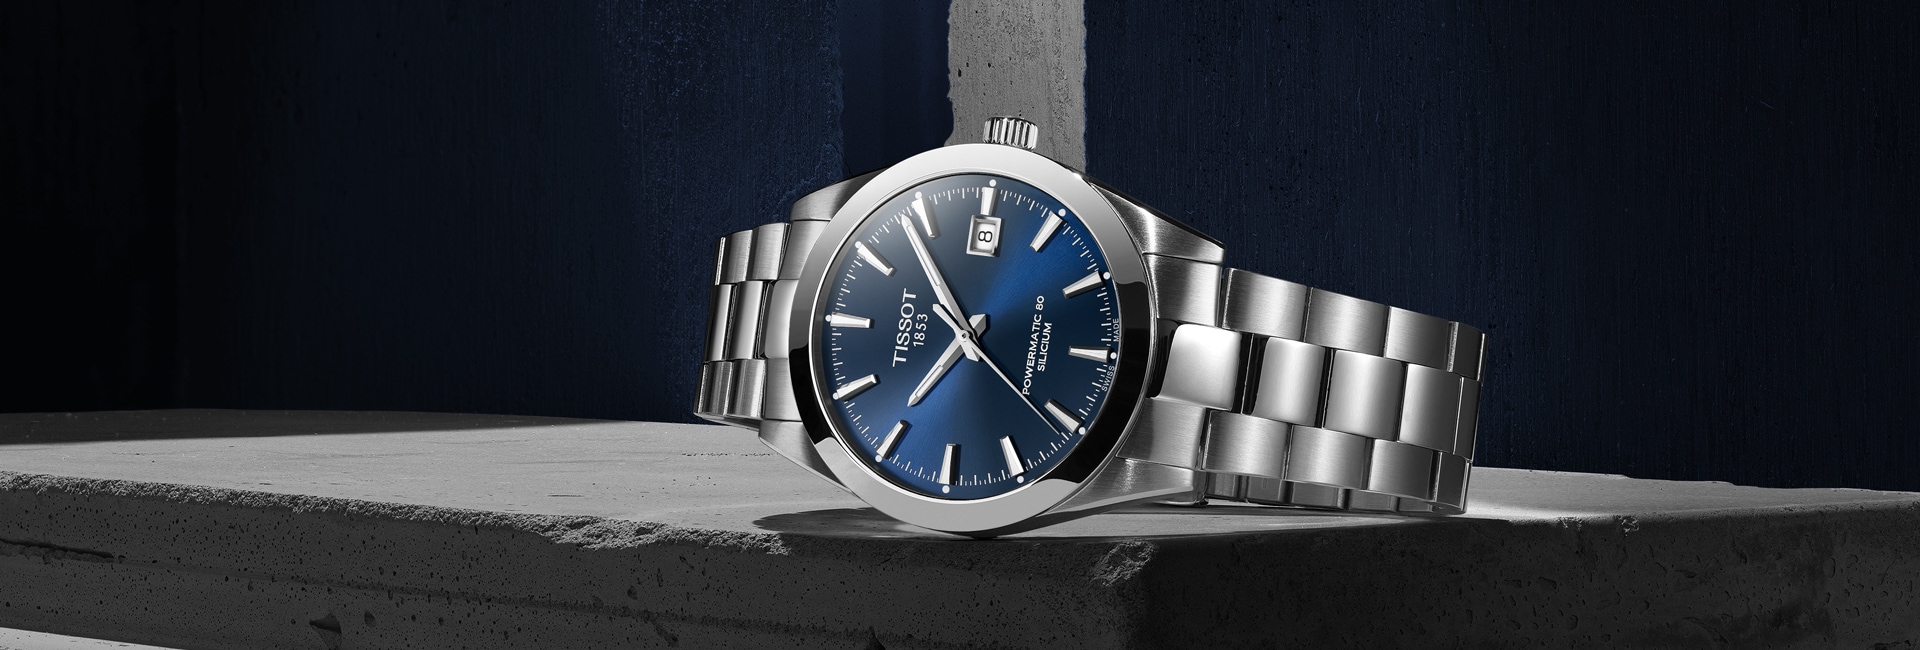 TISSOT T-Classic Watch Collection, Tissot® official website